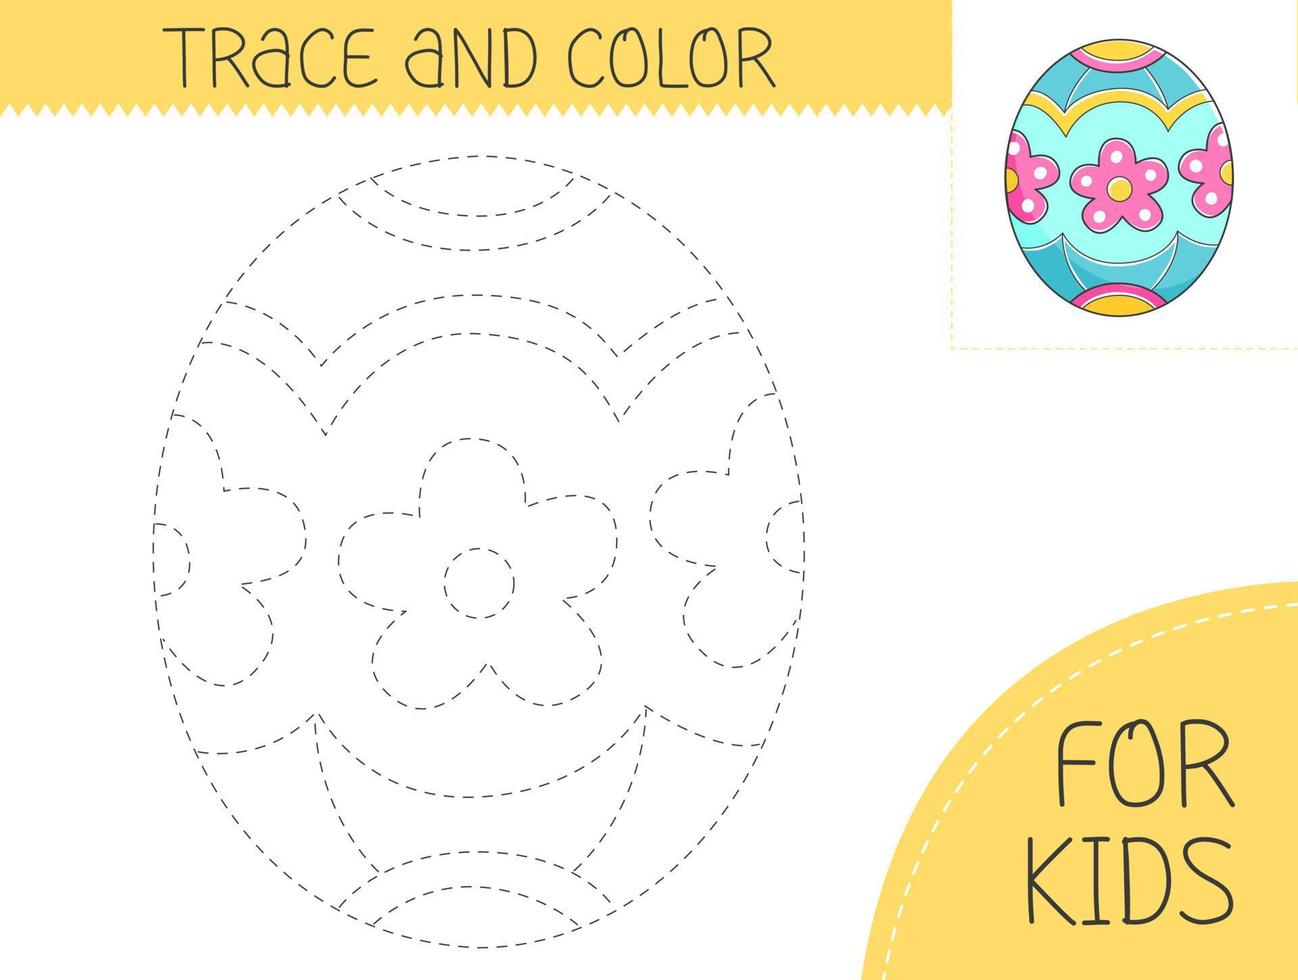 Trace and color coloring book with easter egg for kids. Coloring page with cartoon easter egg. Vector holiday illustration for kids.